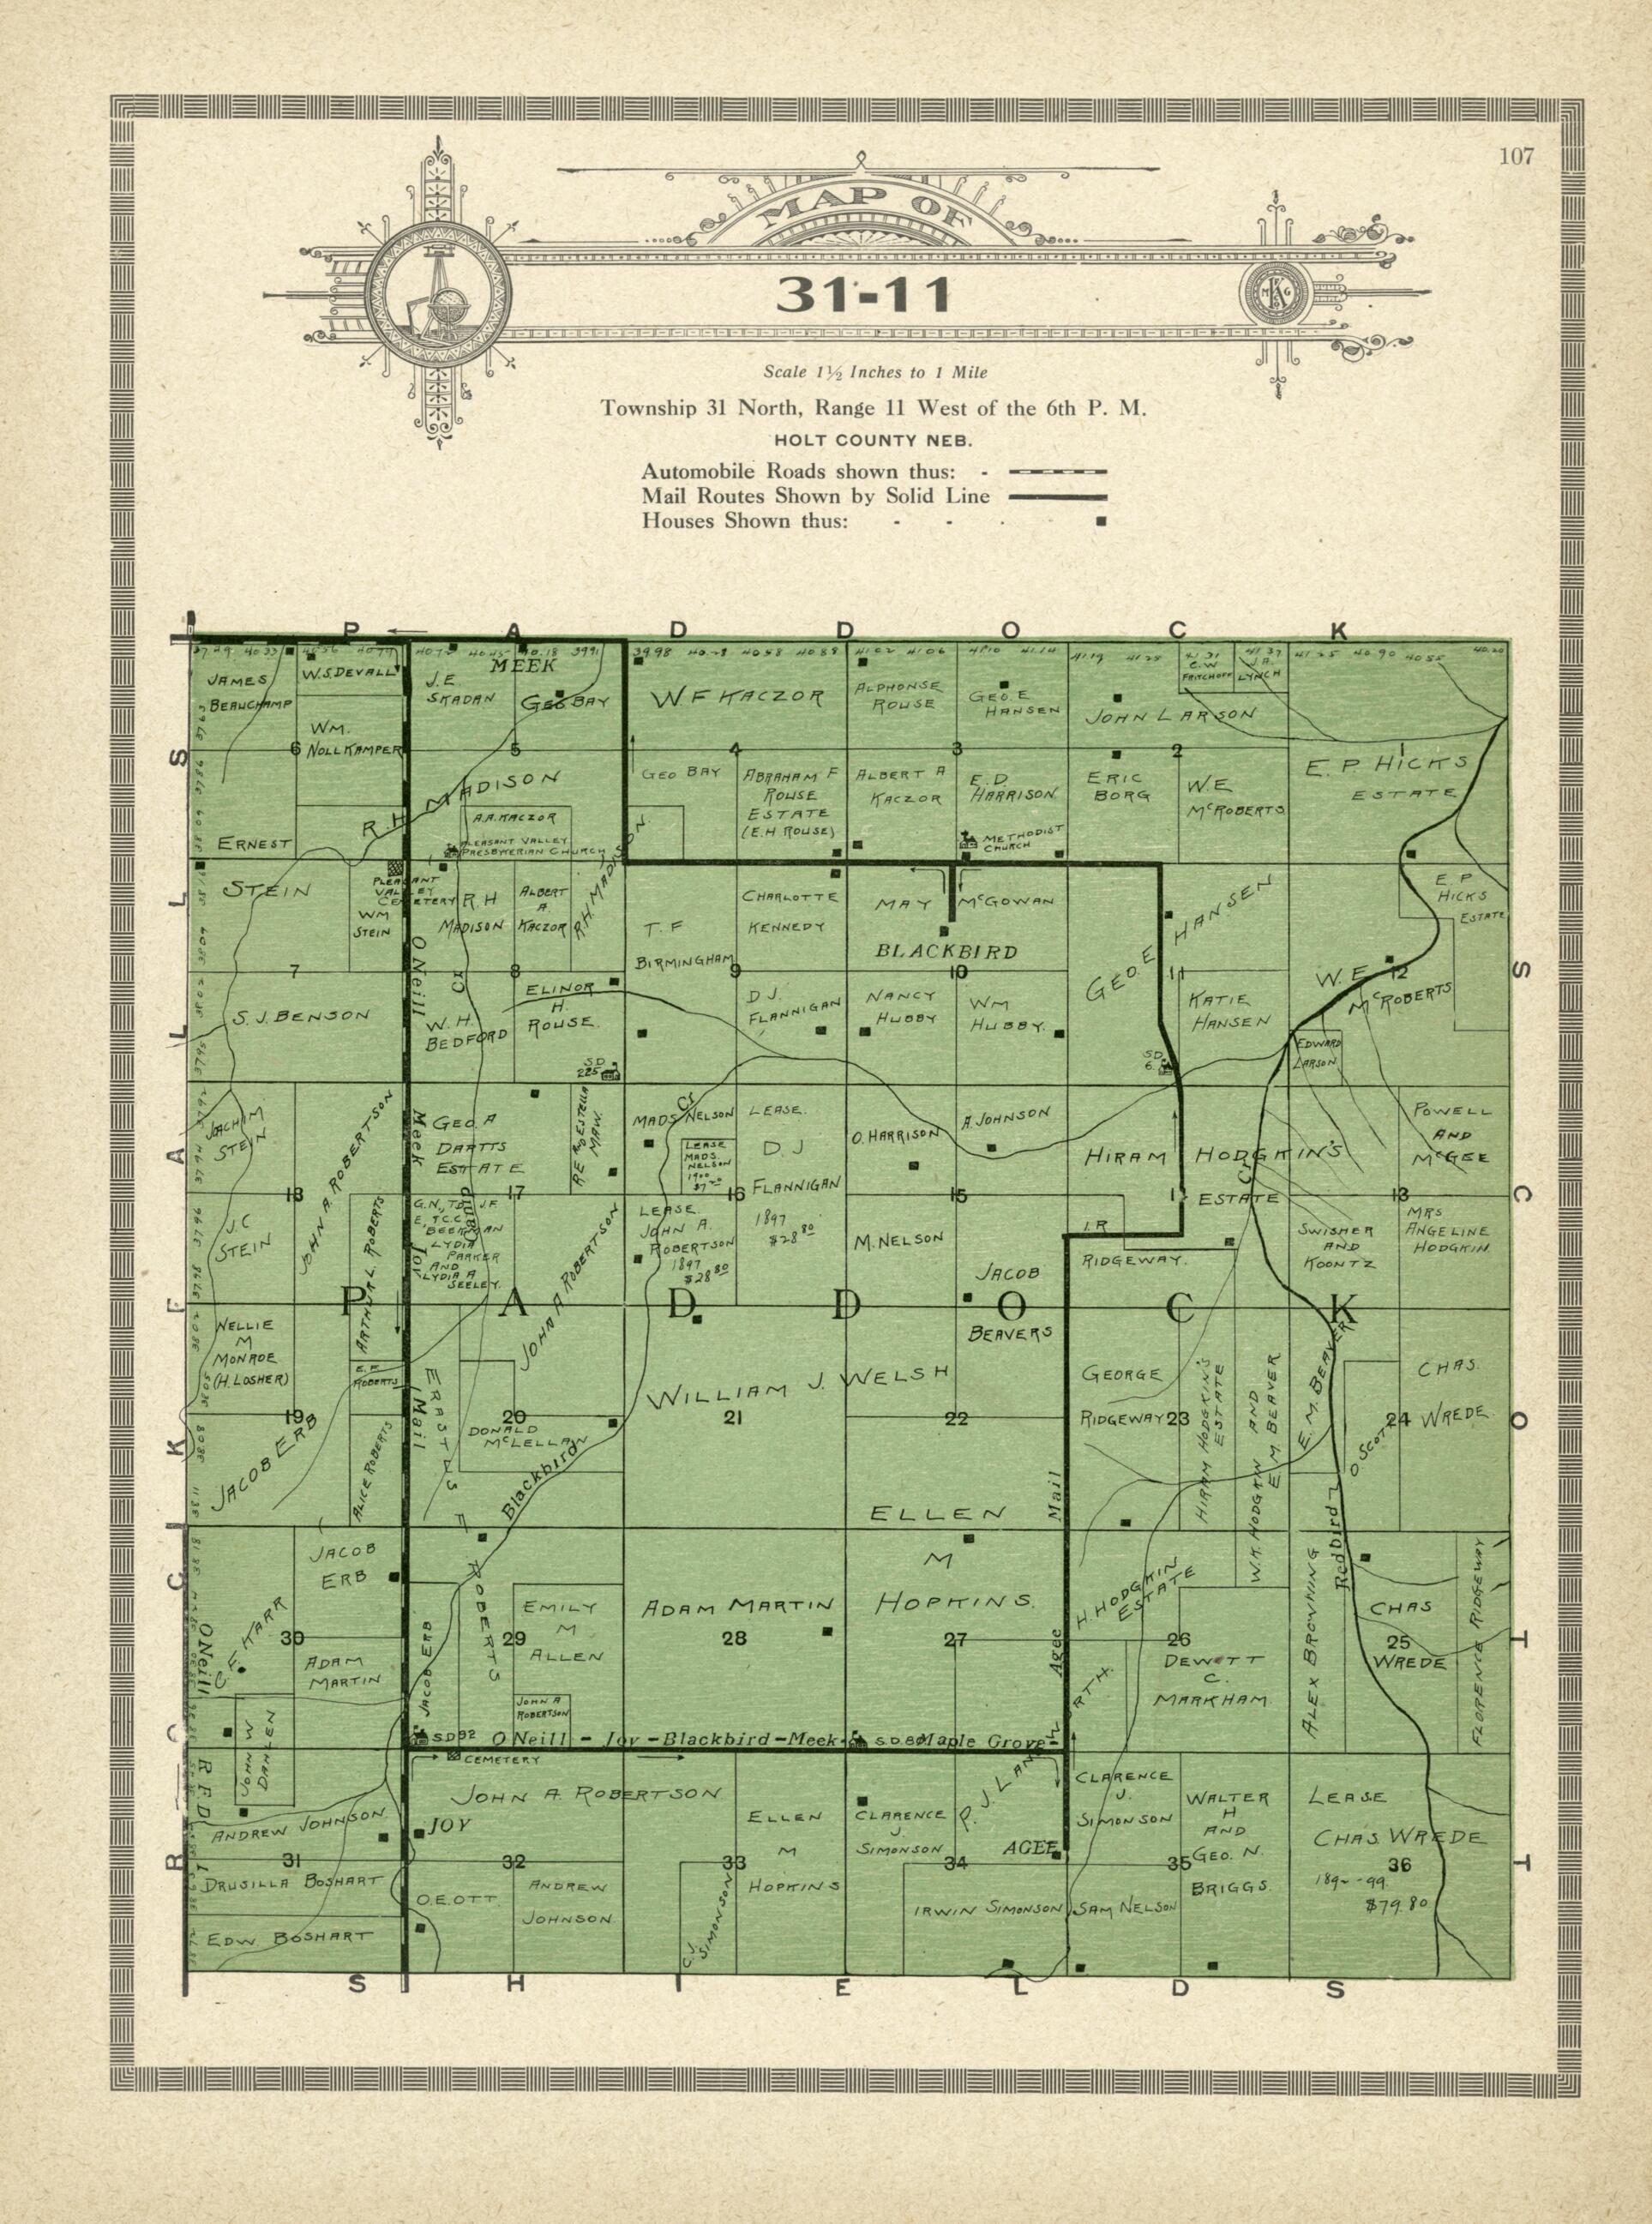 This old map of Map of 31-11 from Standard Atlas and Directory of Holt County, Nebraska from 1915 was created by Iowa) Kenyon Company (Des Moines in 1915